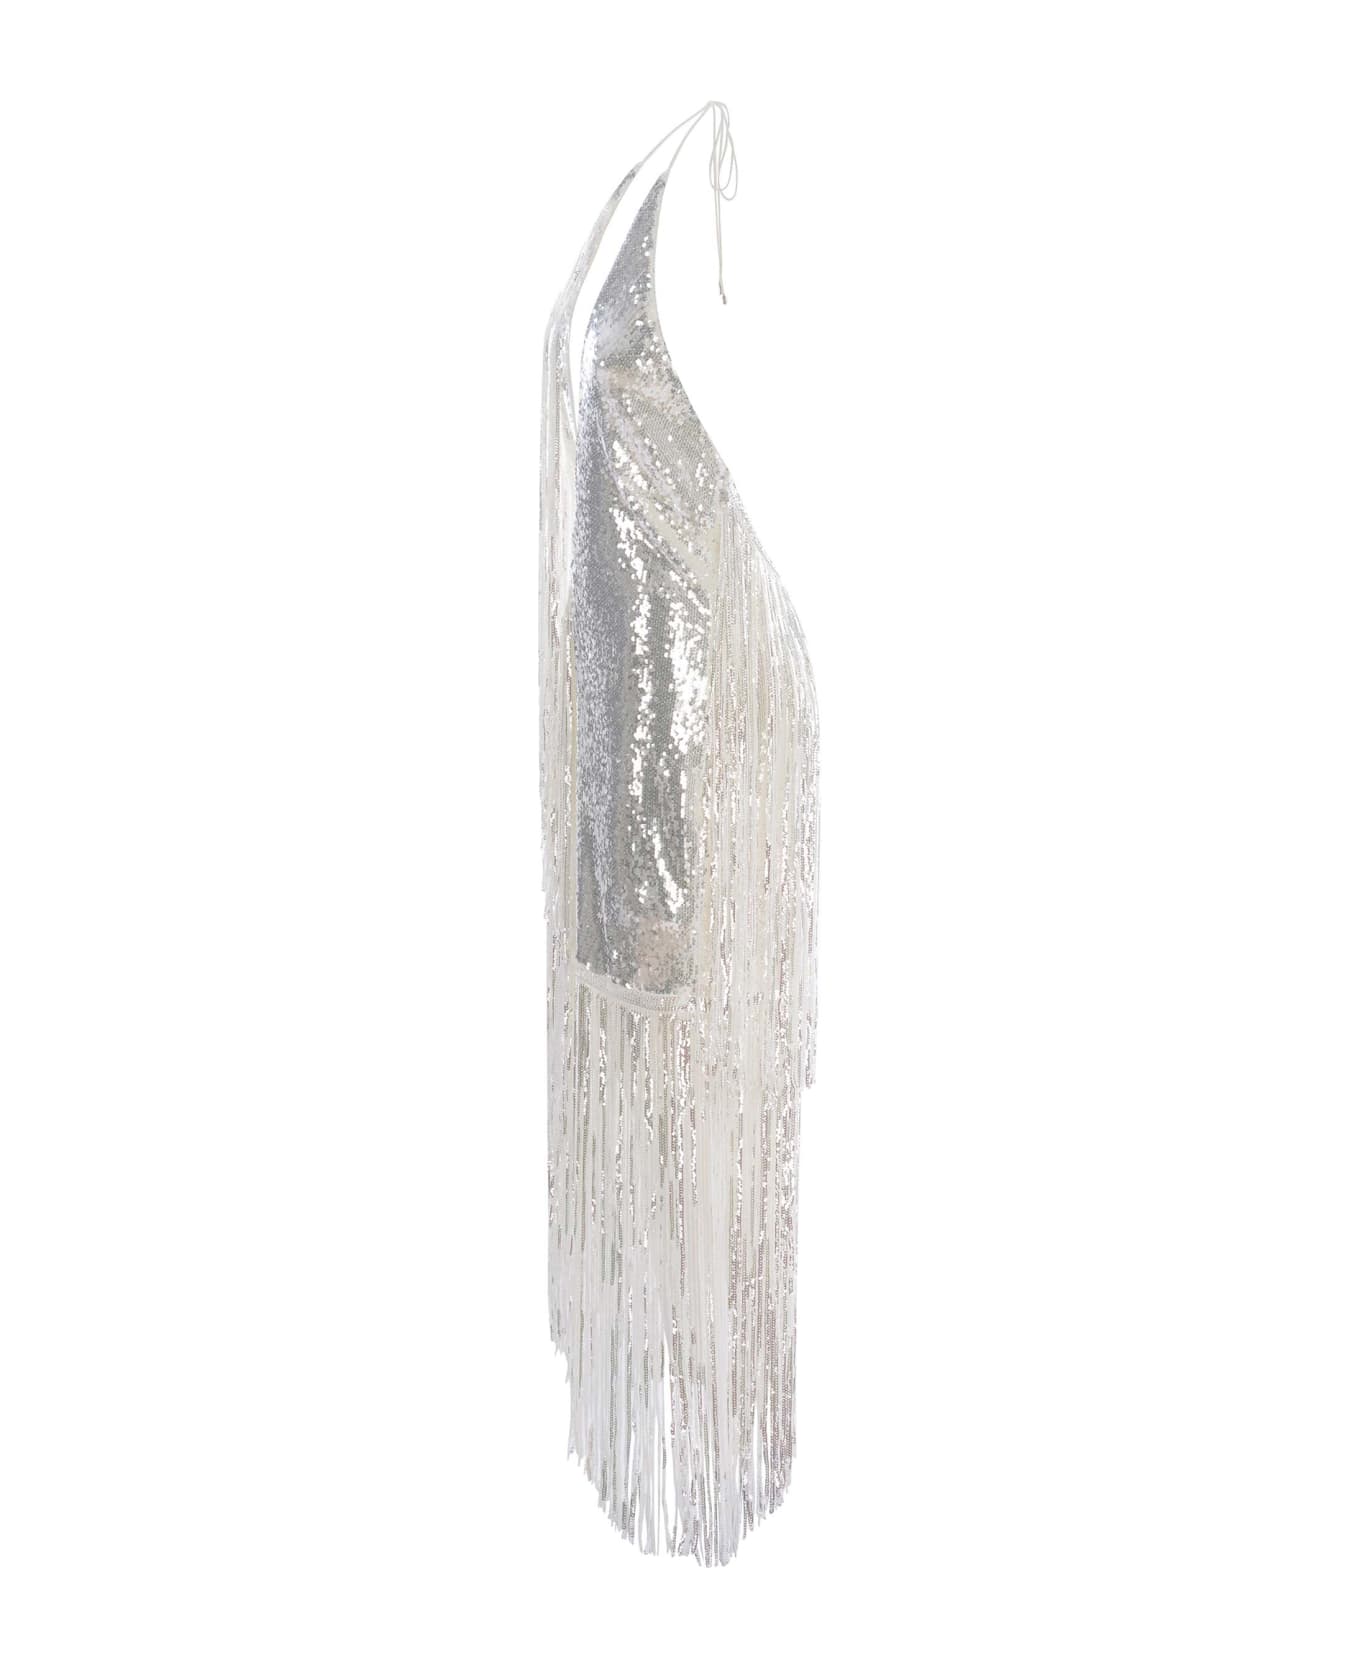 Rotate by Birger Christensen Dress Rotate Made With Fringes And Sequins - Bianco ワンピース＆ドレス